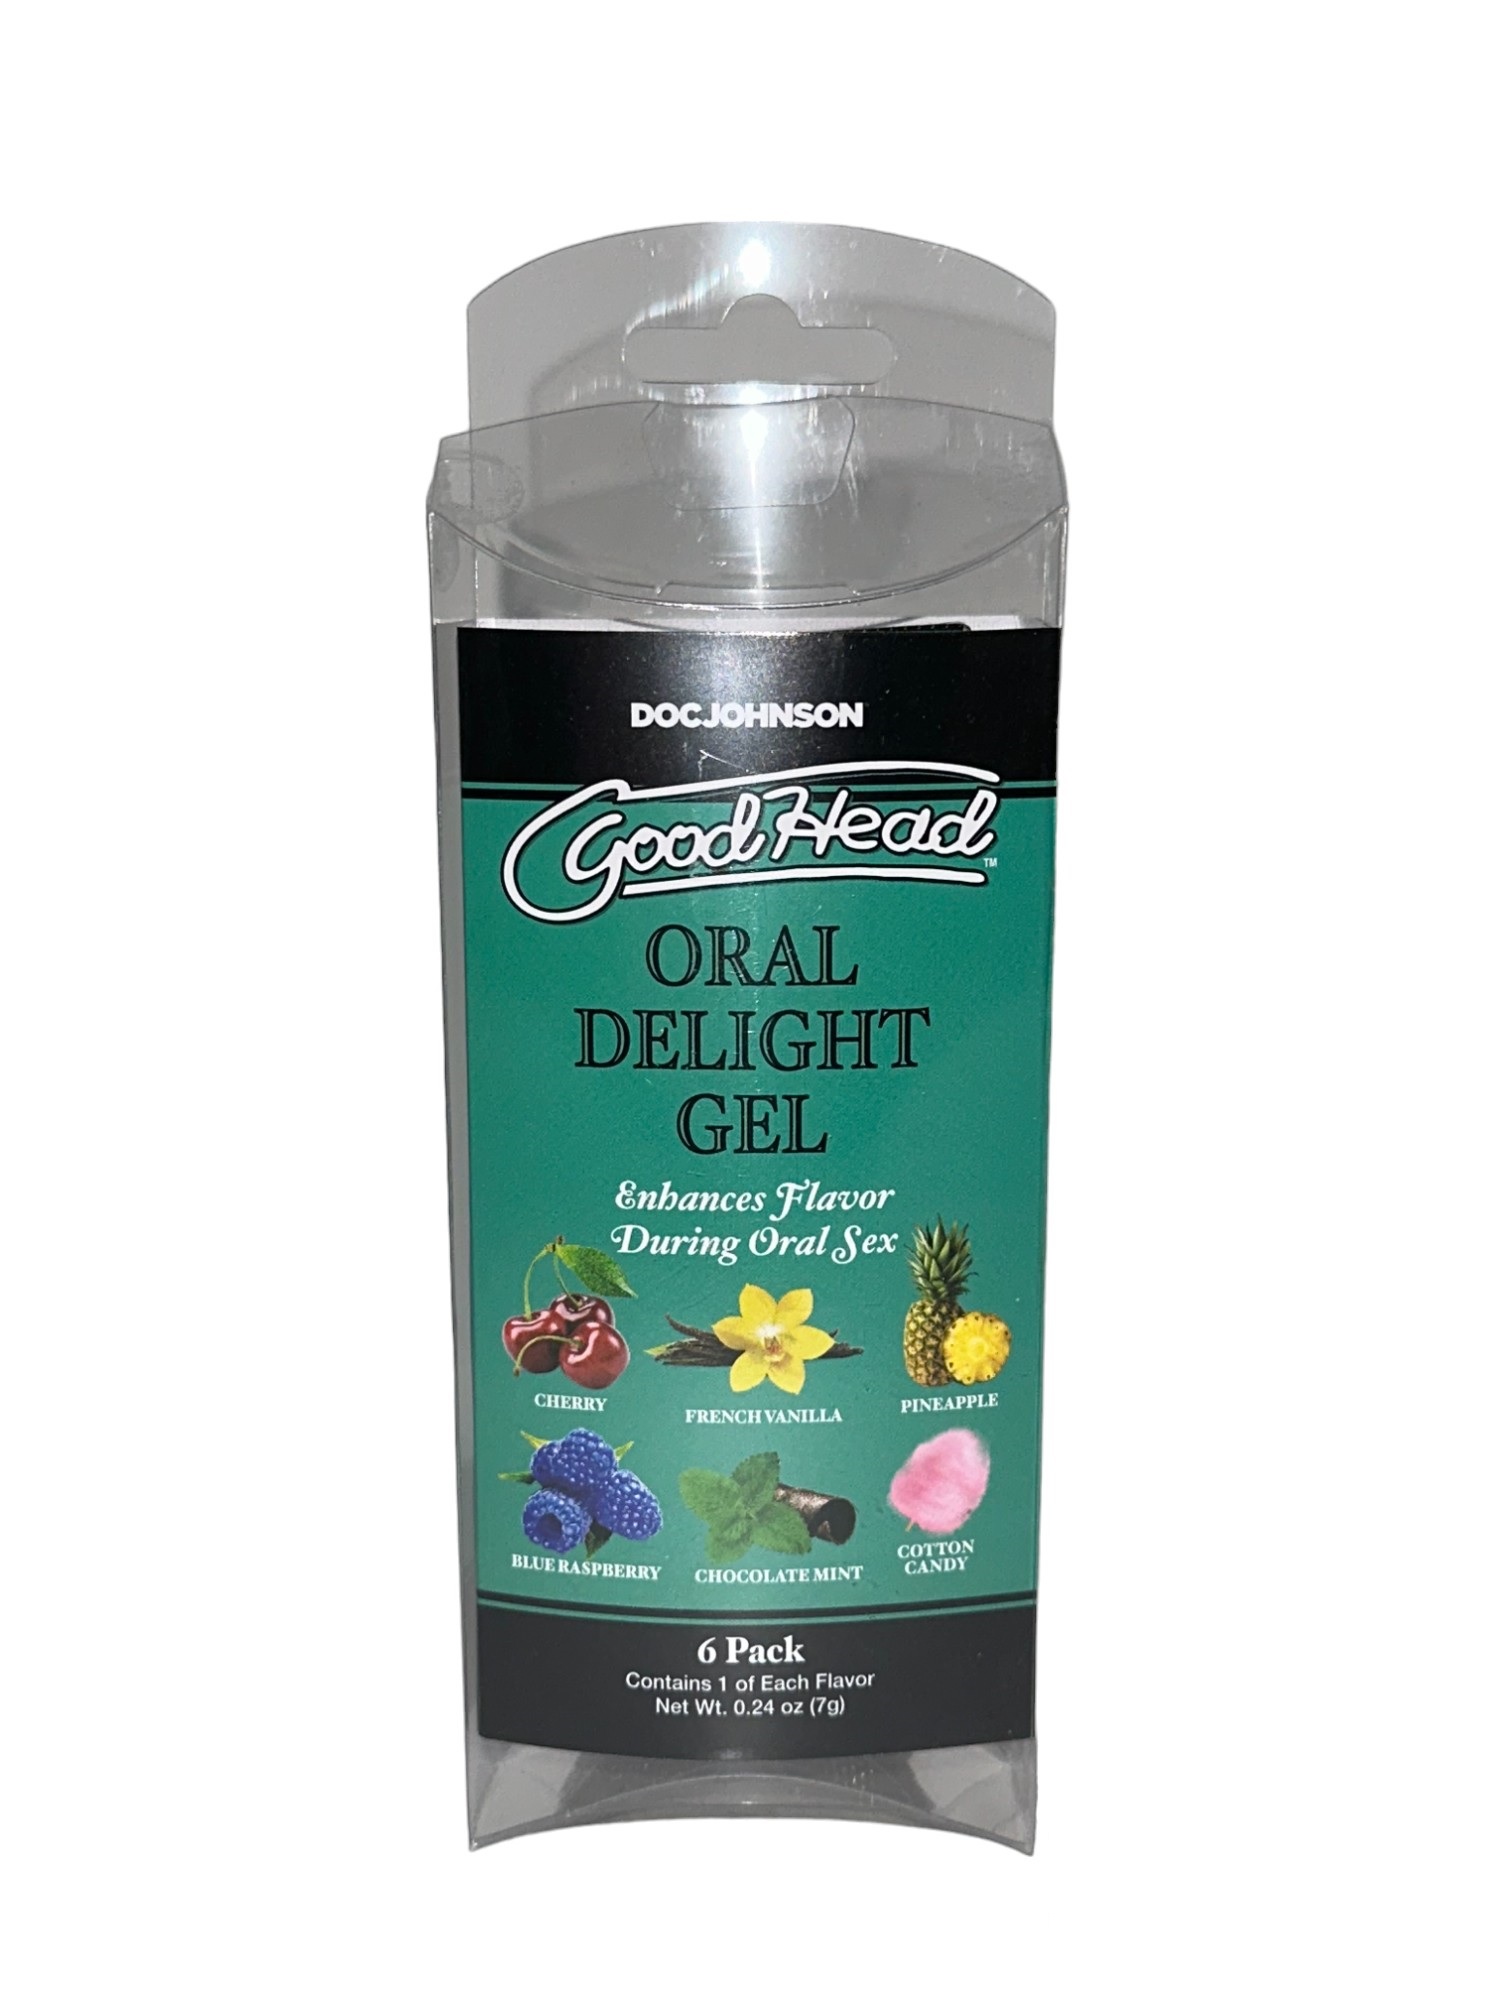 GOODHEAD WARMING ORAL DELIGHT GEL 6 PACK - Click Image to Close